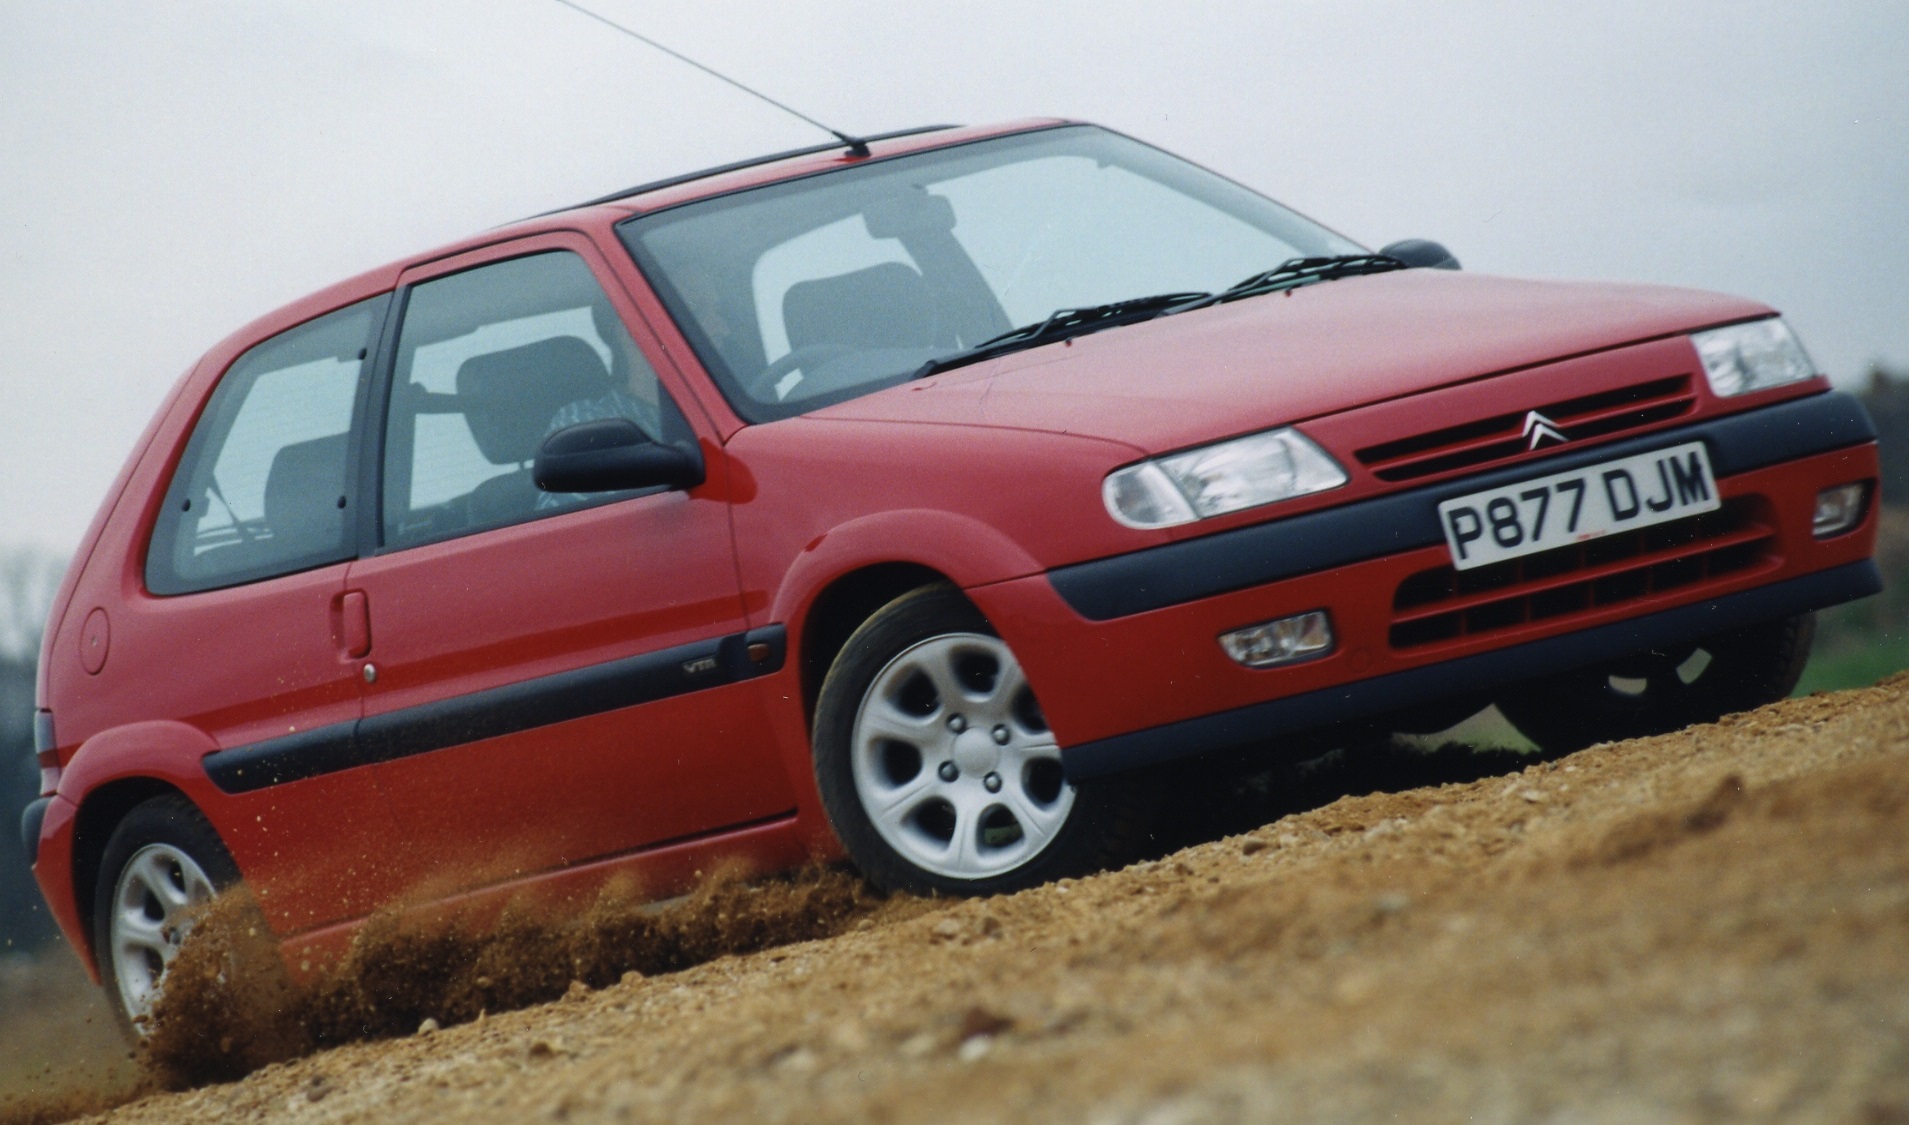 Citroën Saxo VTS/VTR – The Time is Now